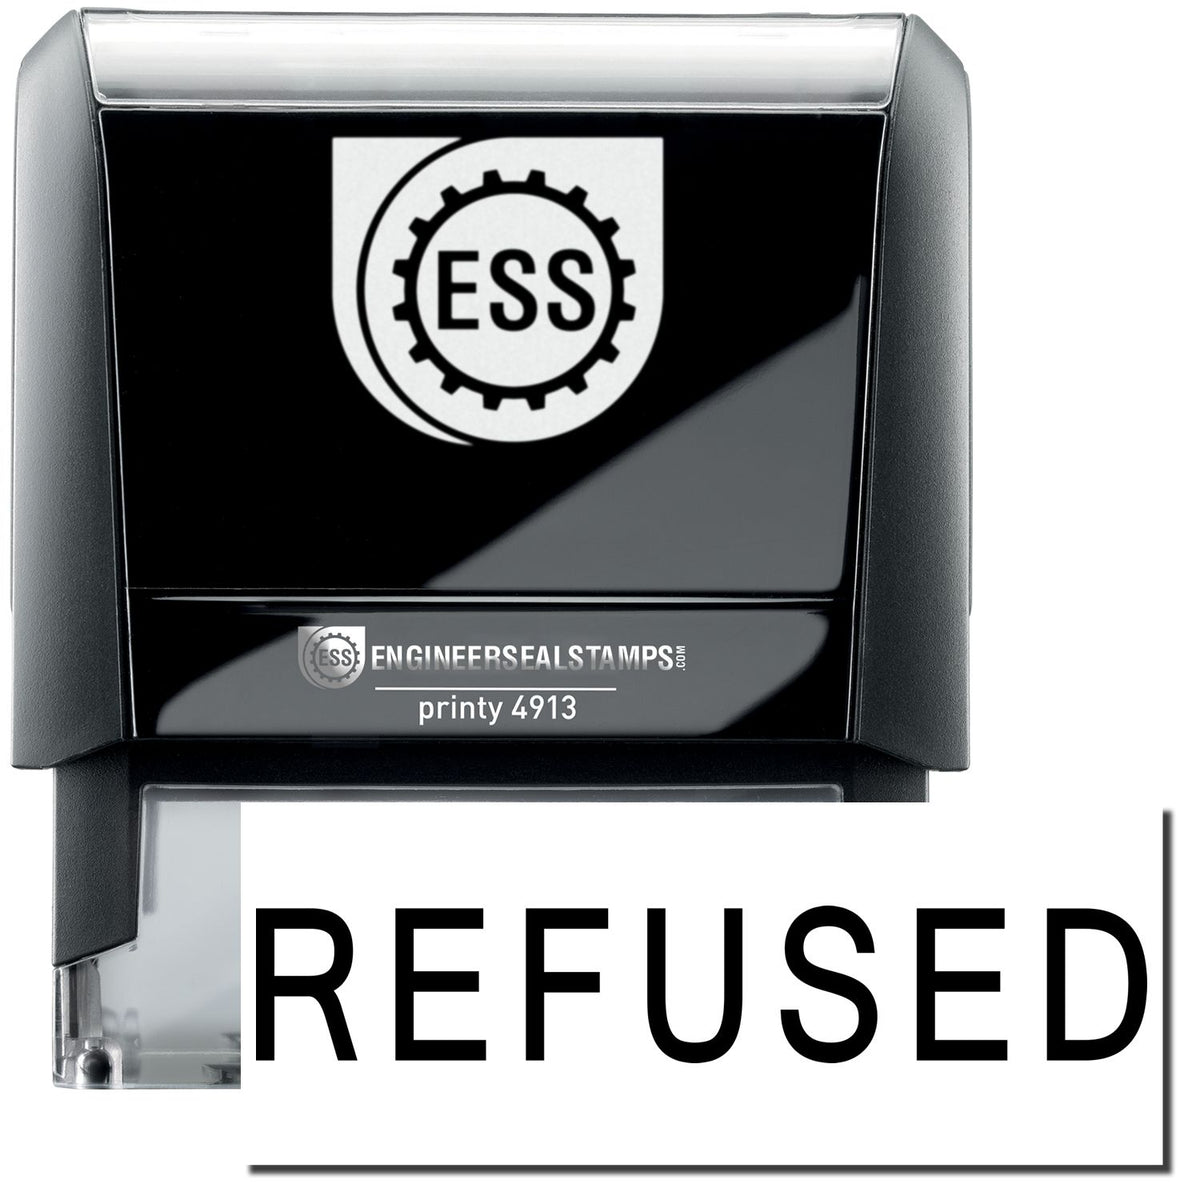 A self-inking stamp with a stamped image showing how the text &quot;REFUSED&quot; in a large font is displayed by it after stamping.